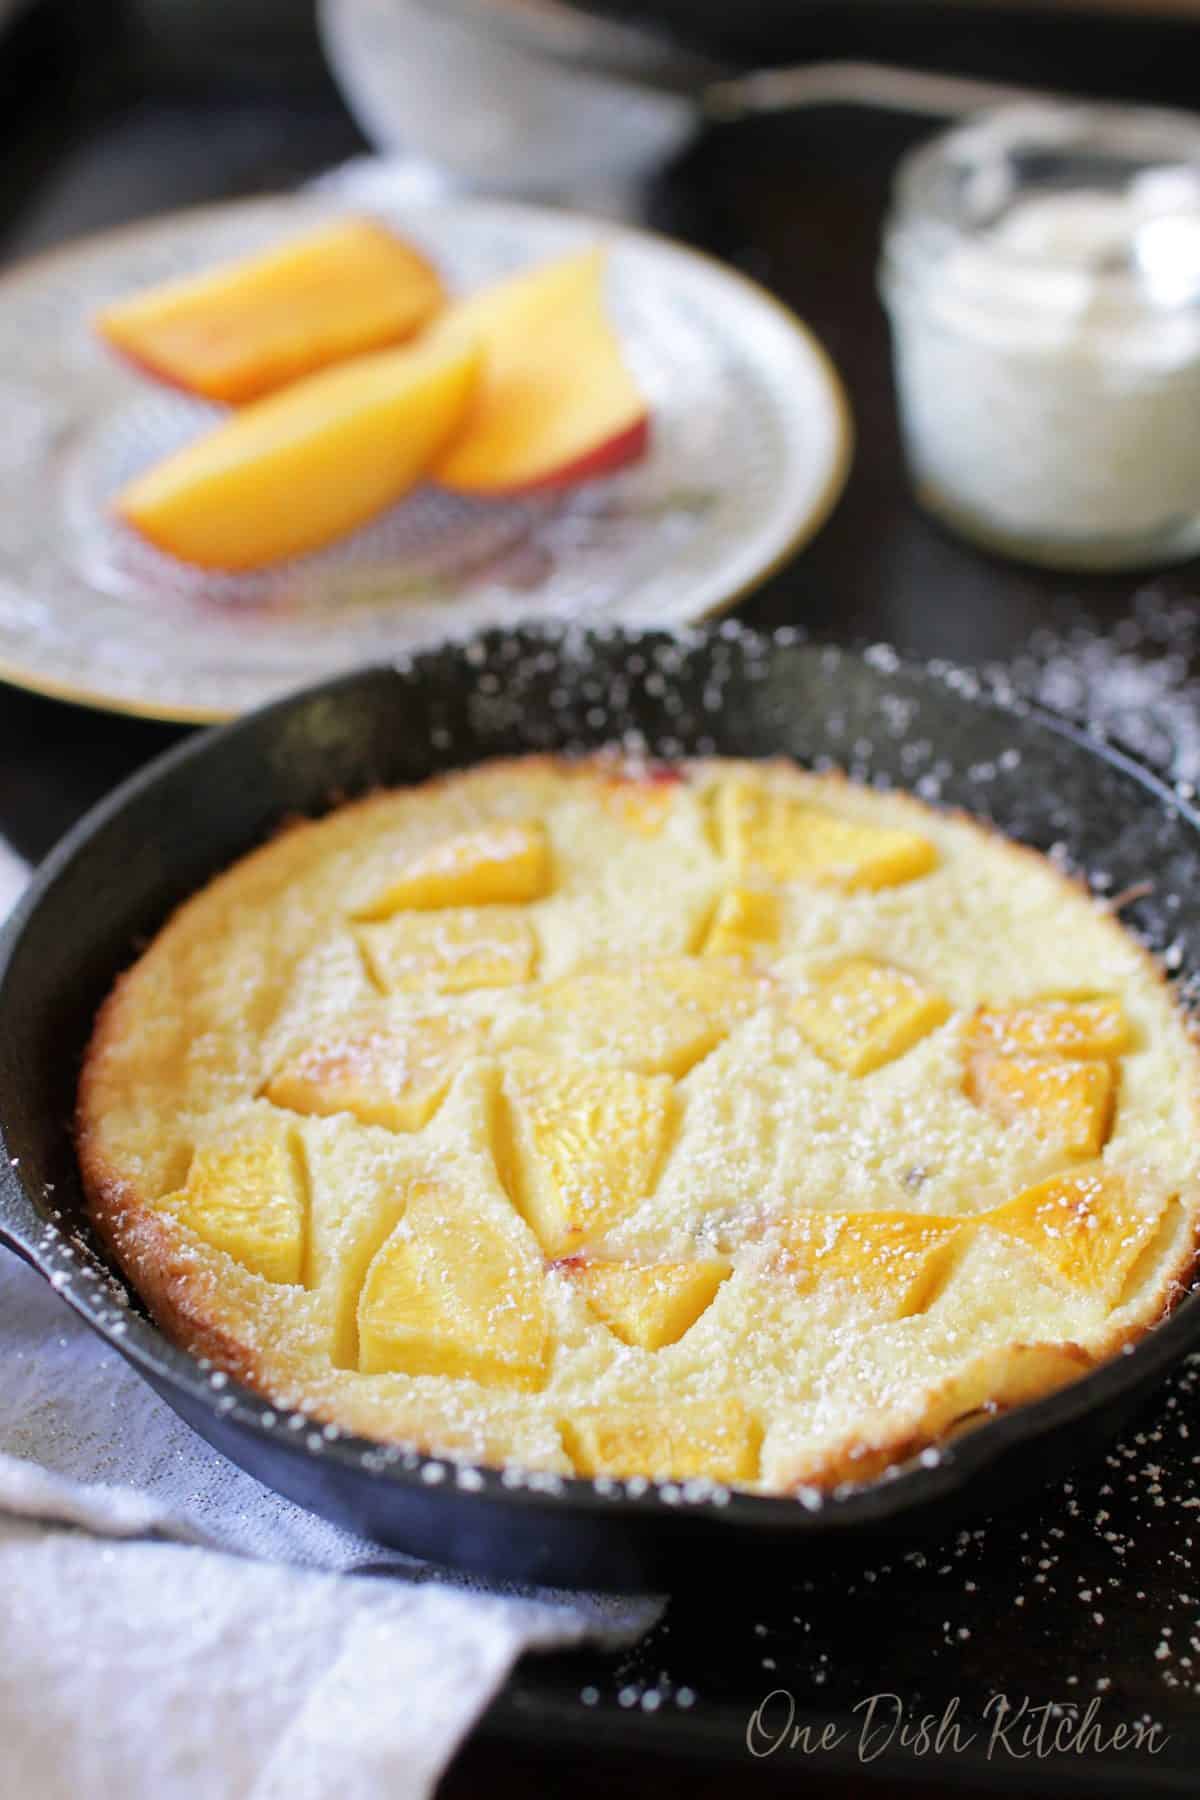 A puffed pancake in a small cast iron skillet topped with chopped peaches and dusted with powdered sugar with a small jar of whipped cream and a plate of sliced peaches in the background